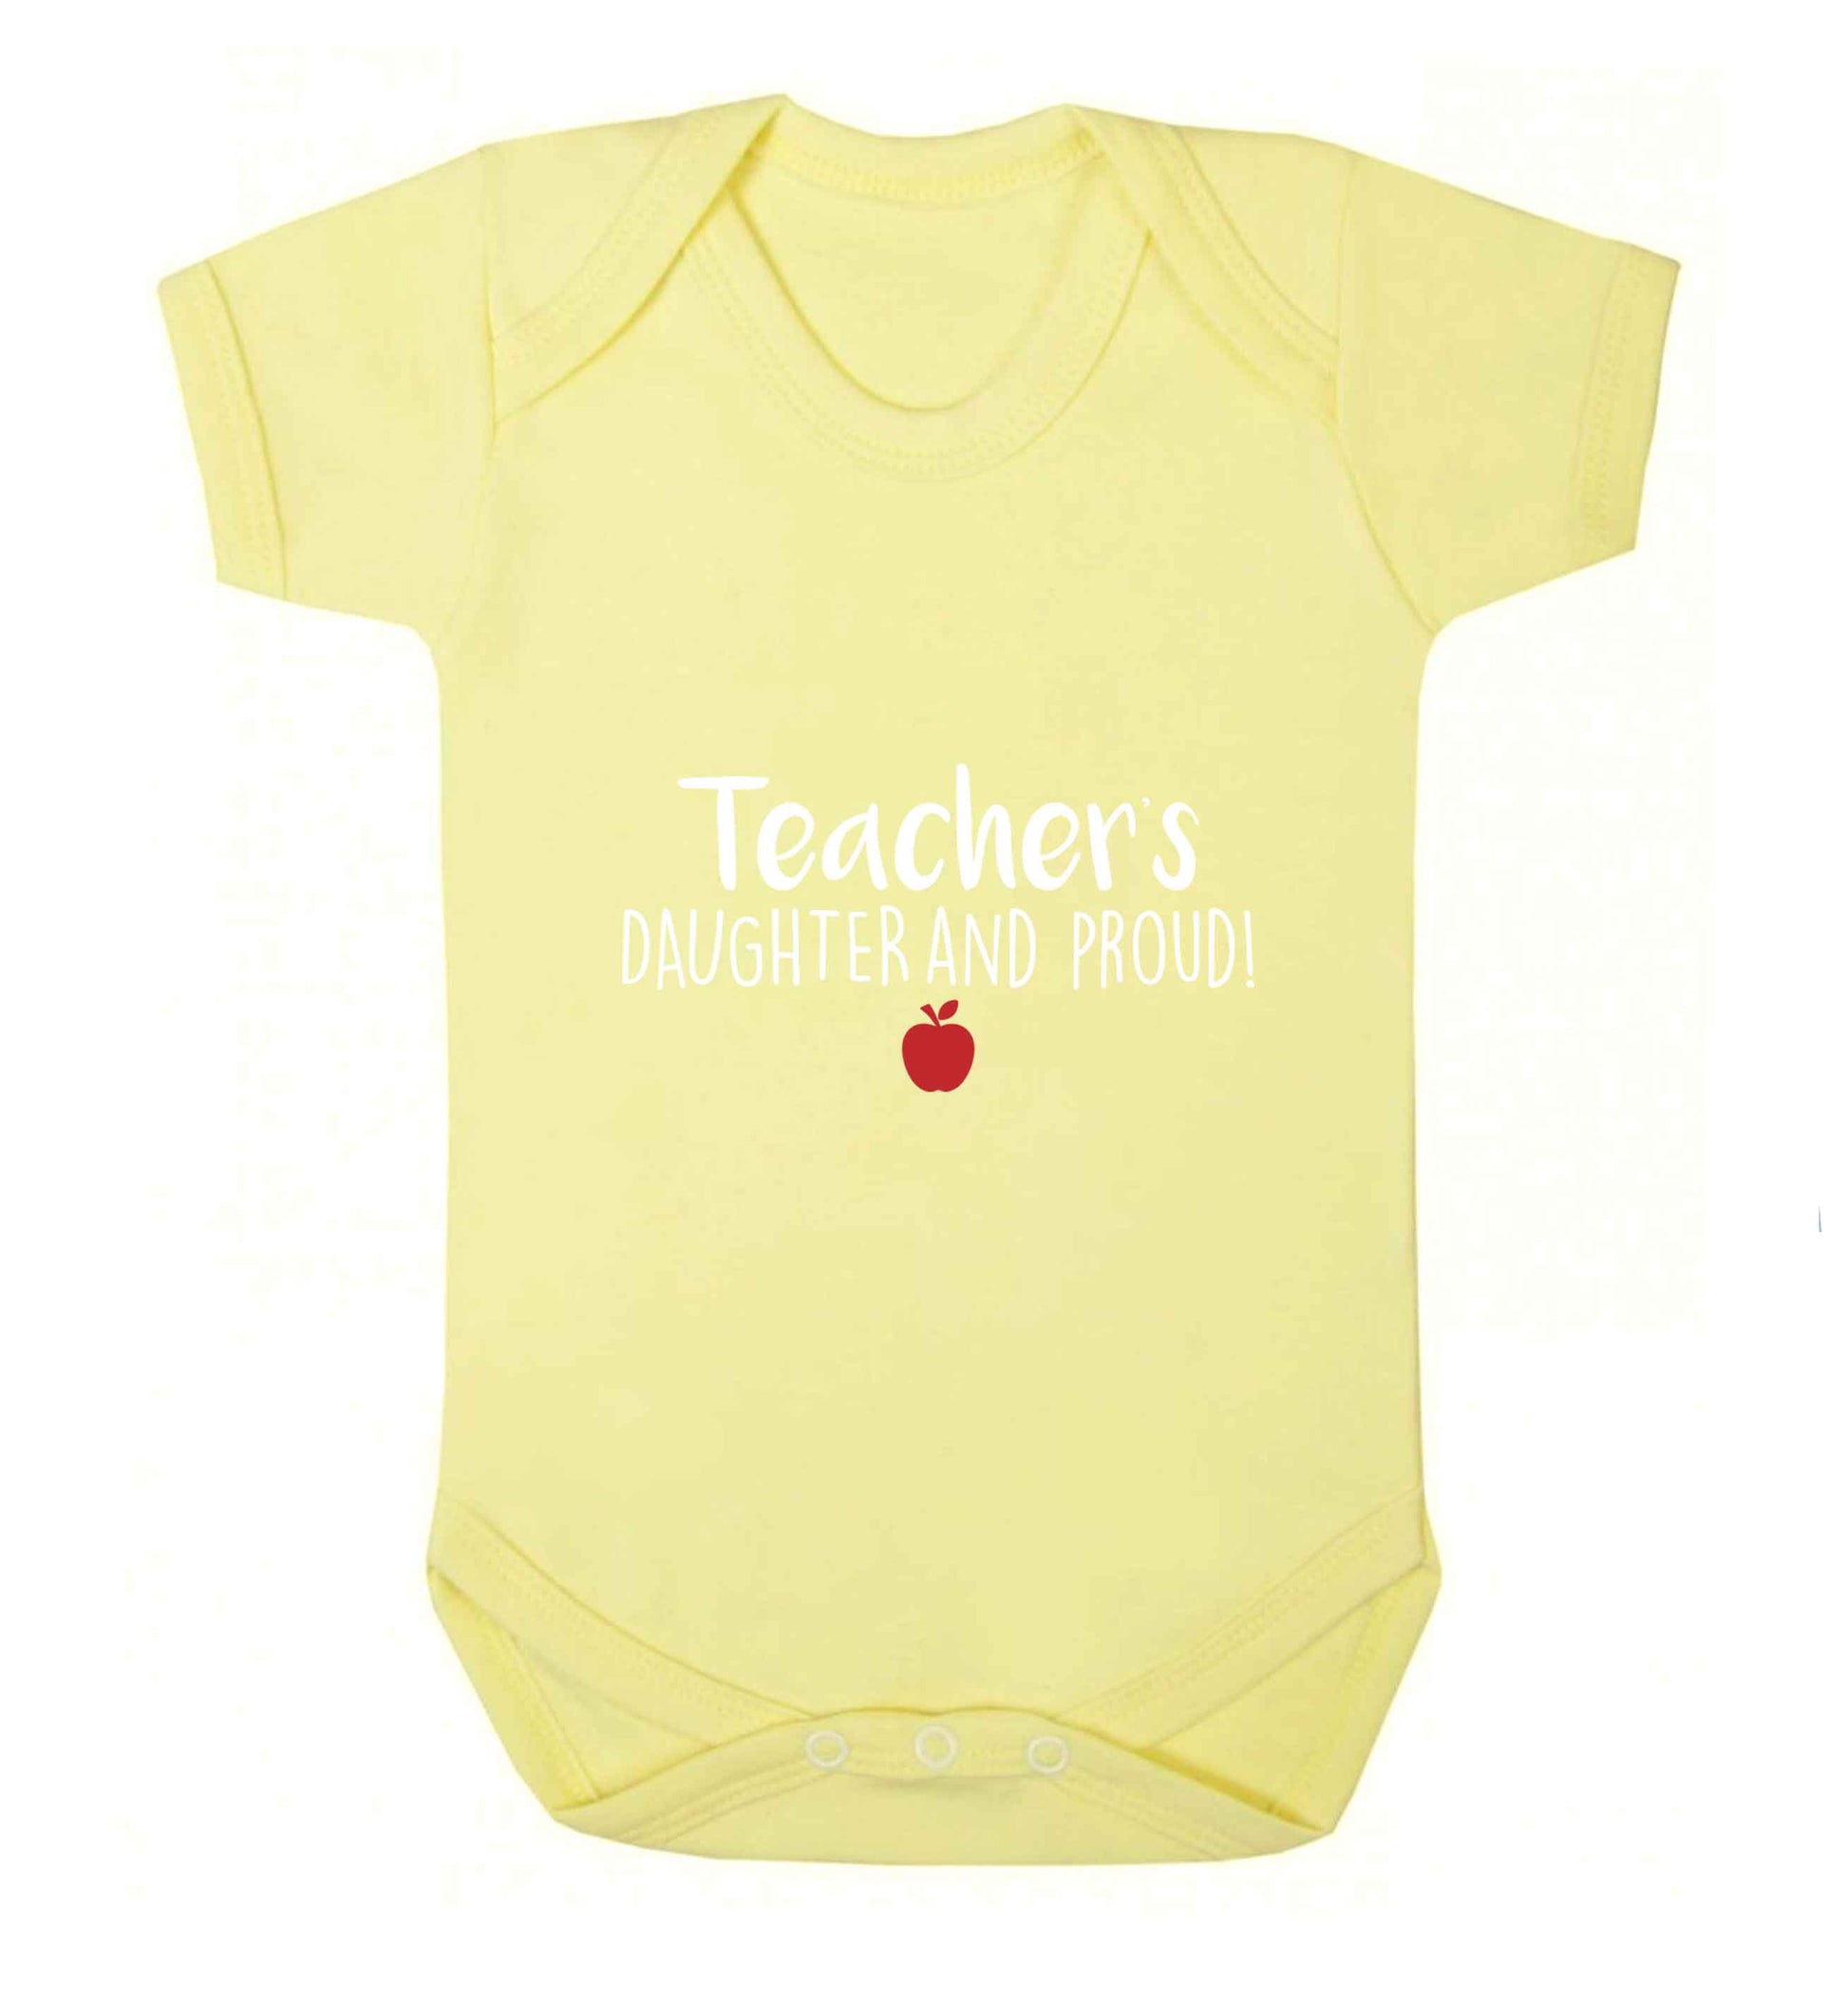 Teachers daughter and proud baby vest pale yellow 18-24 months